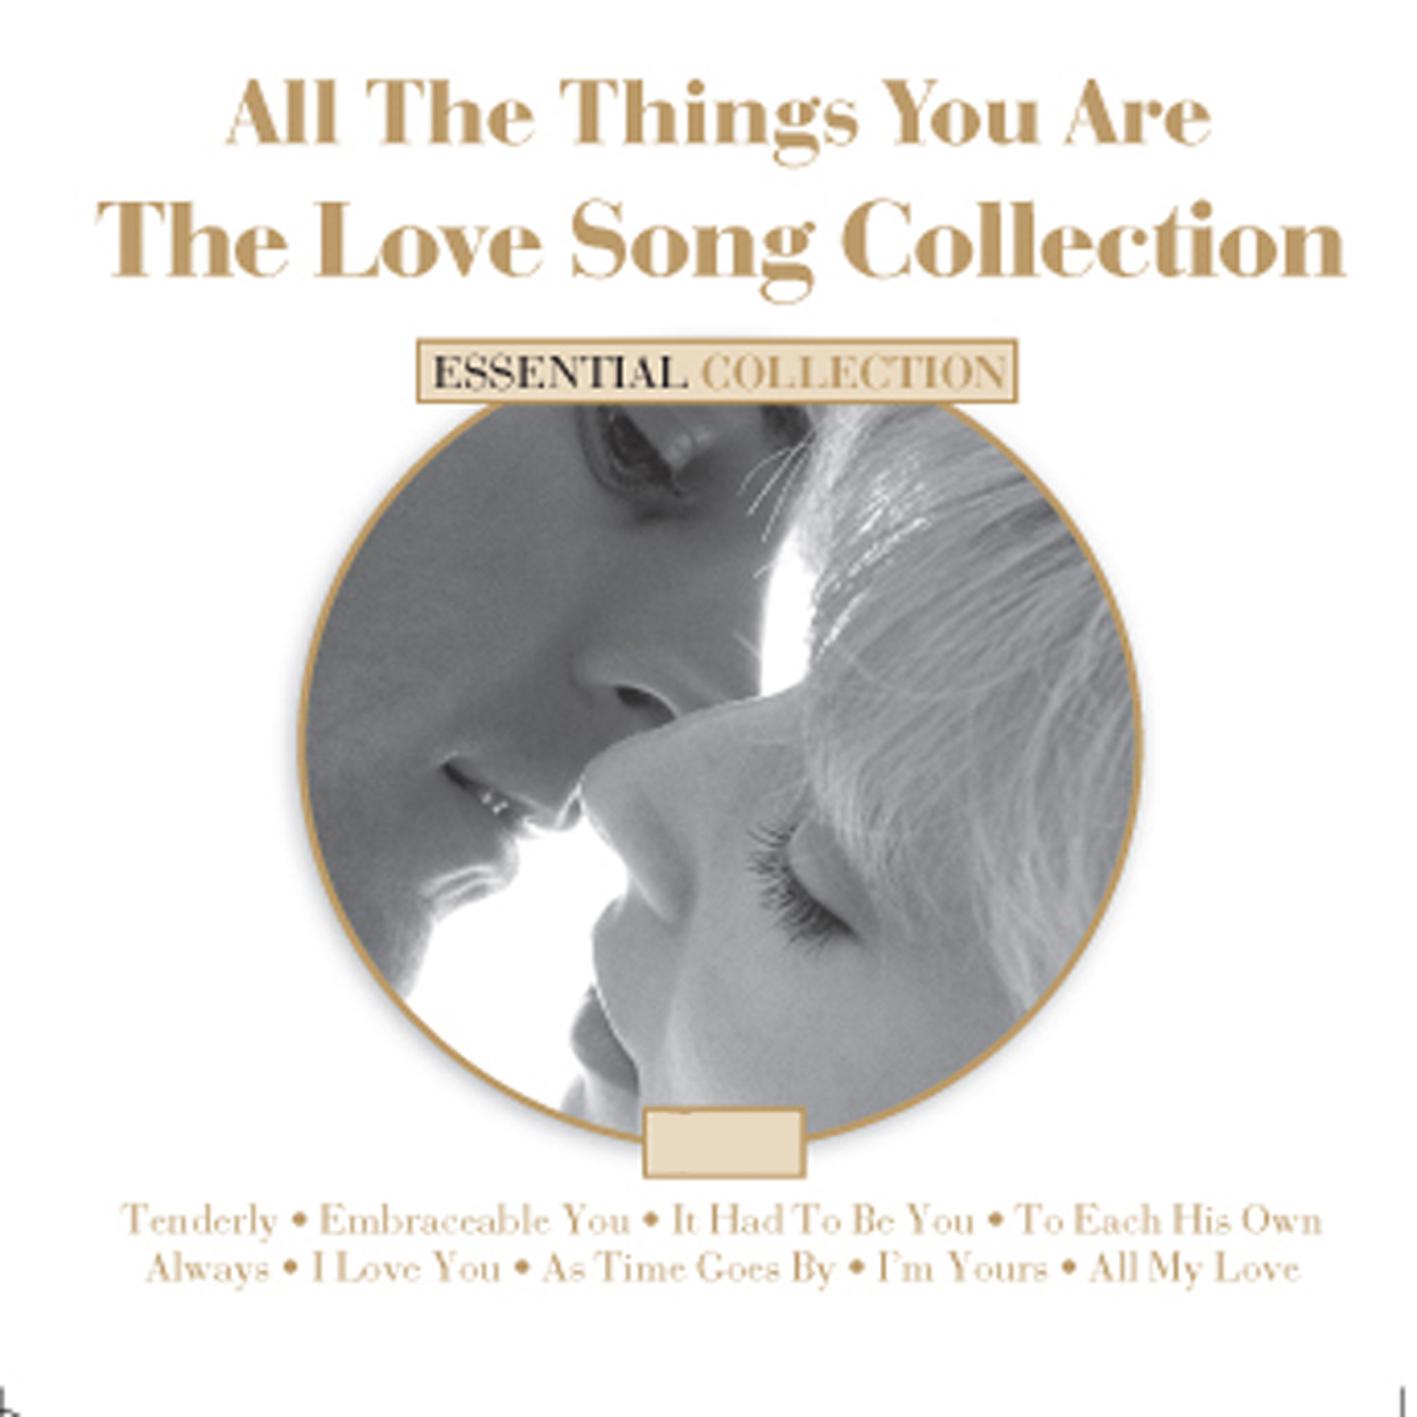 All the Things you Are - The Love Song Collection